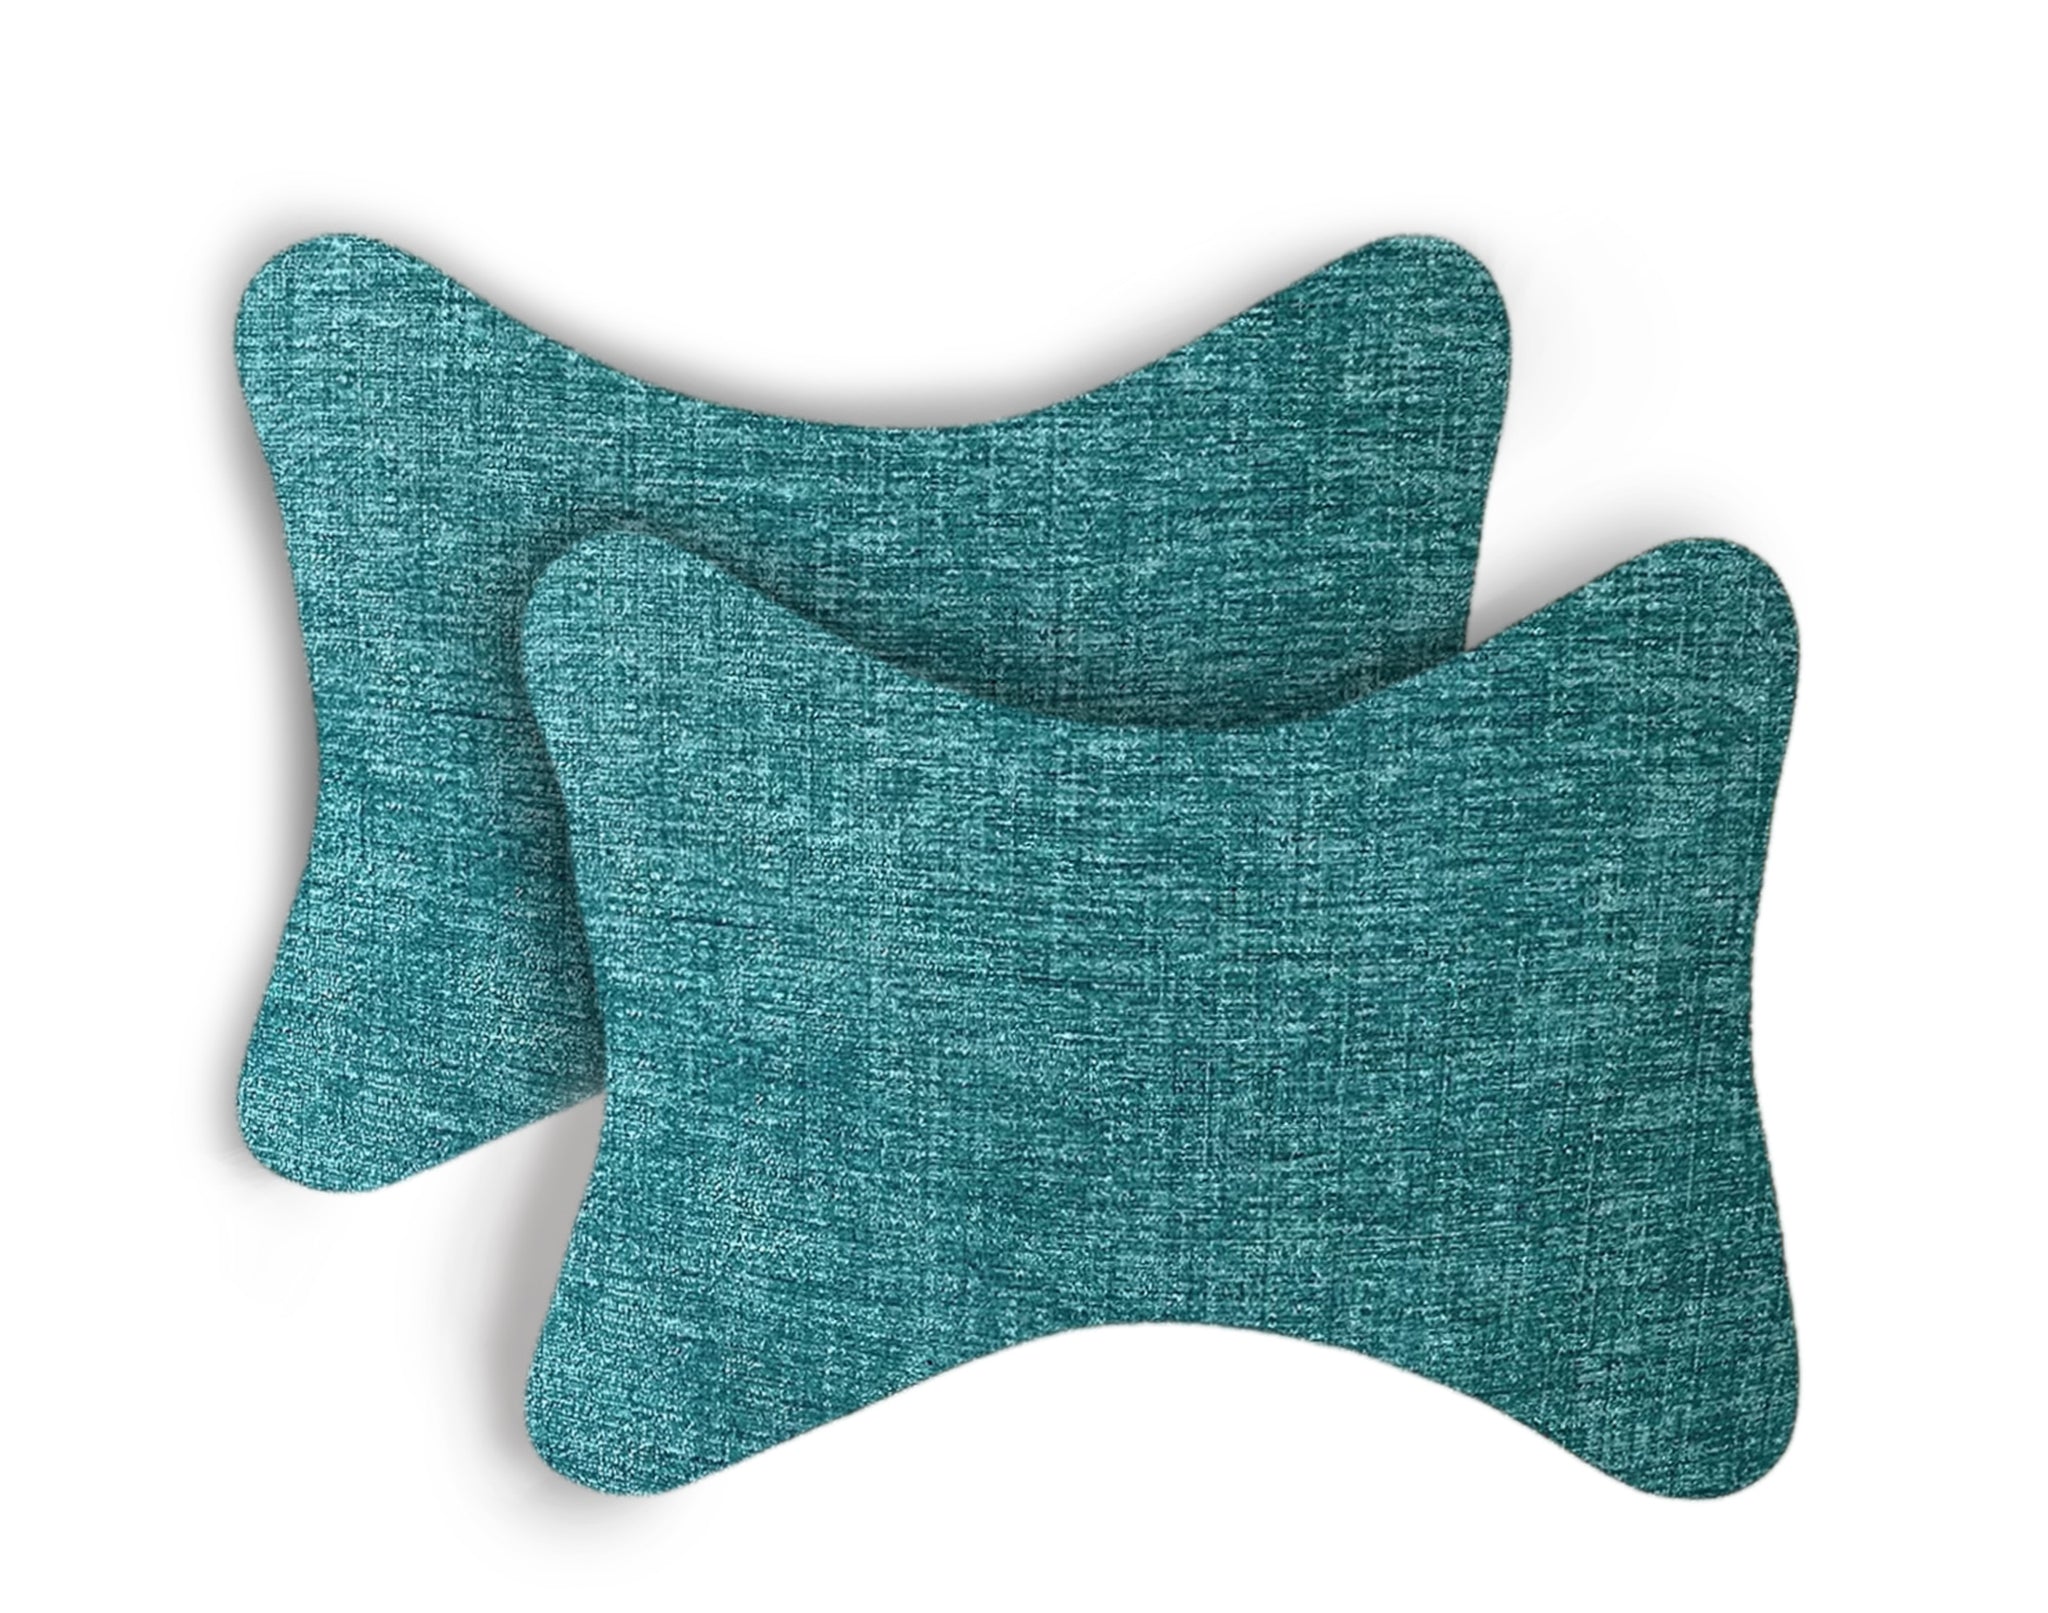 Car Seat Neck Rest Pillow, Cushion For All Cars, Premium Designer Chenille Lumbar, Back and Headrest Support for Car Seat, Size 17x27 cms, Teal Blue, Set of 2 by Lushomes